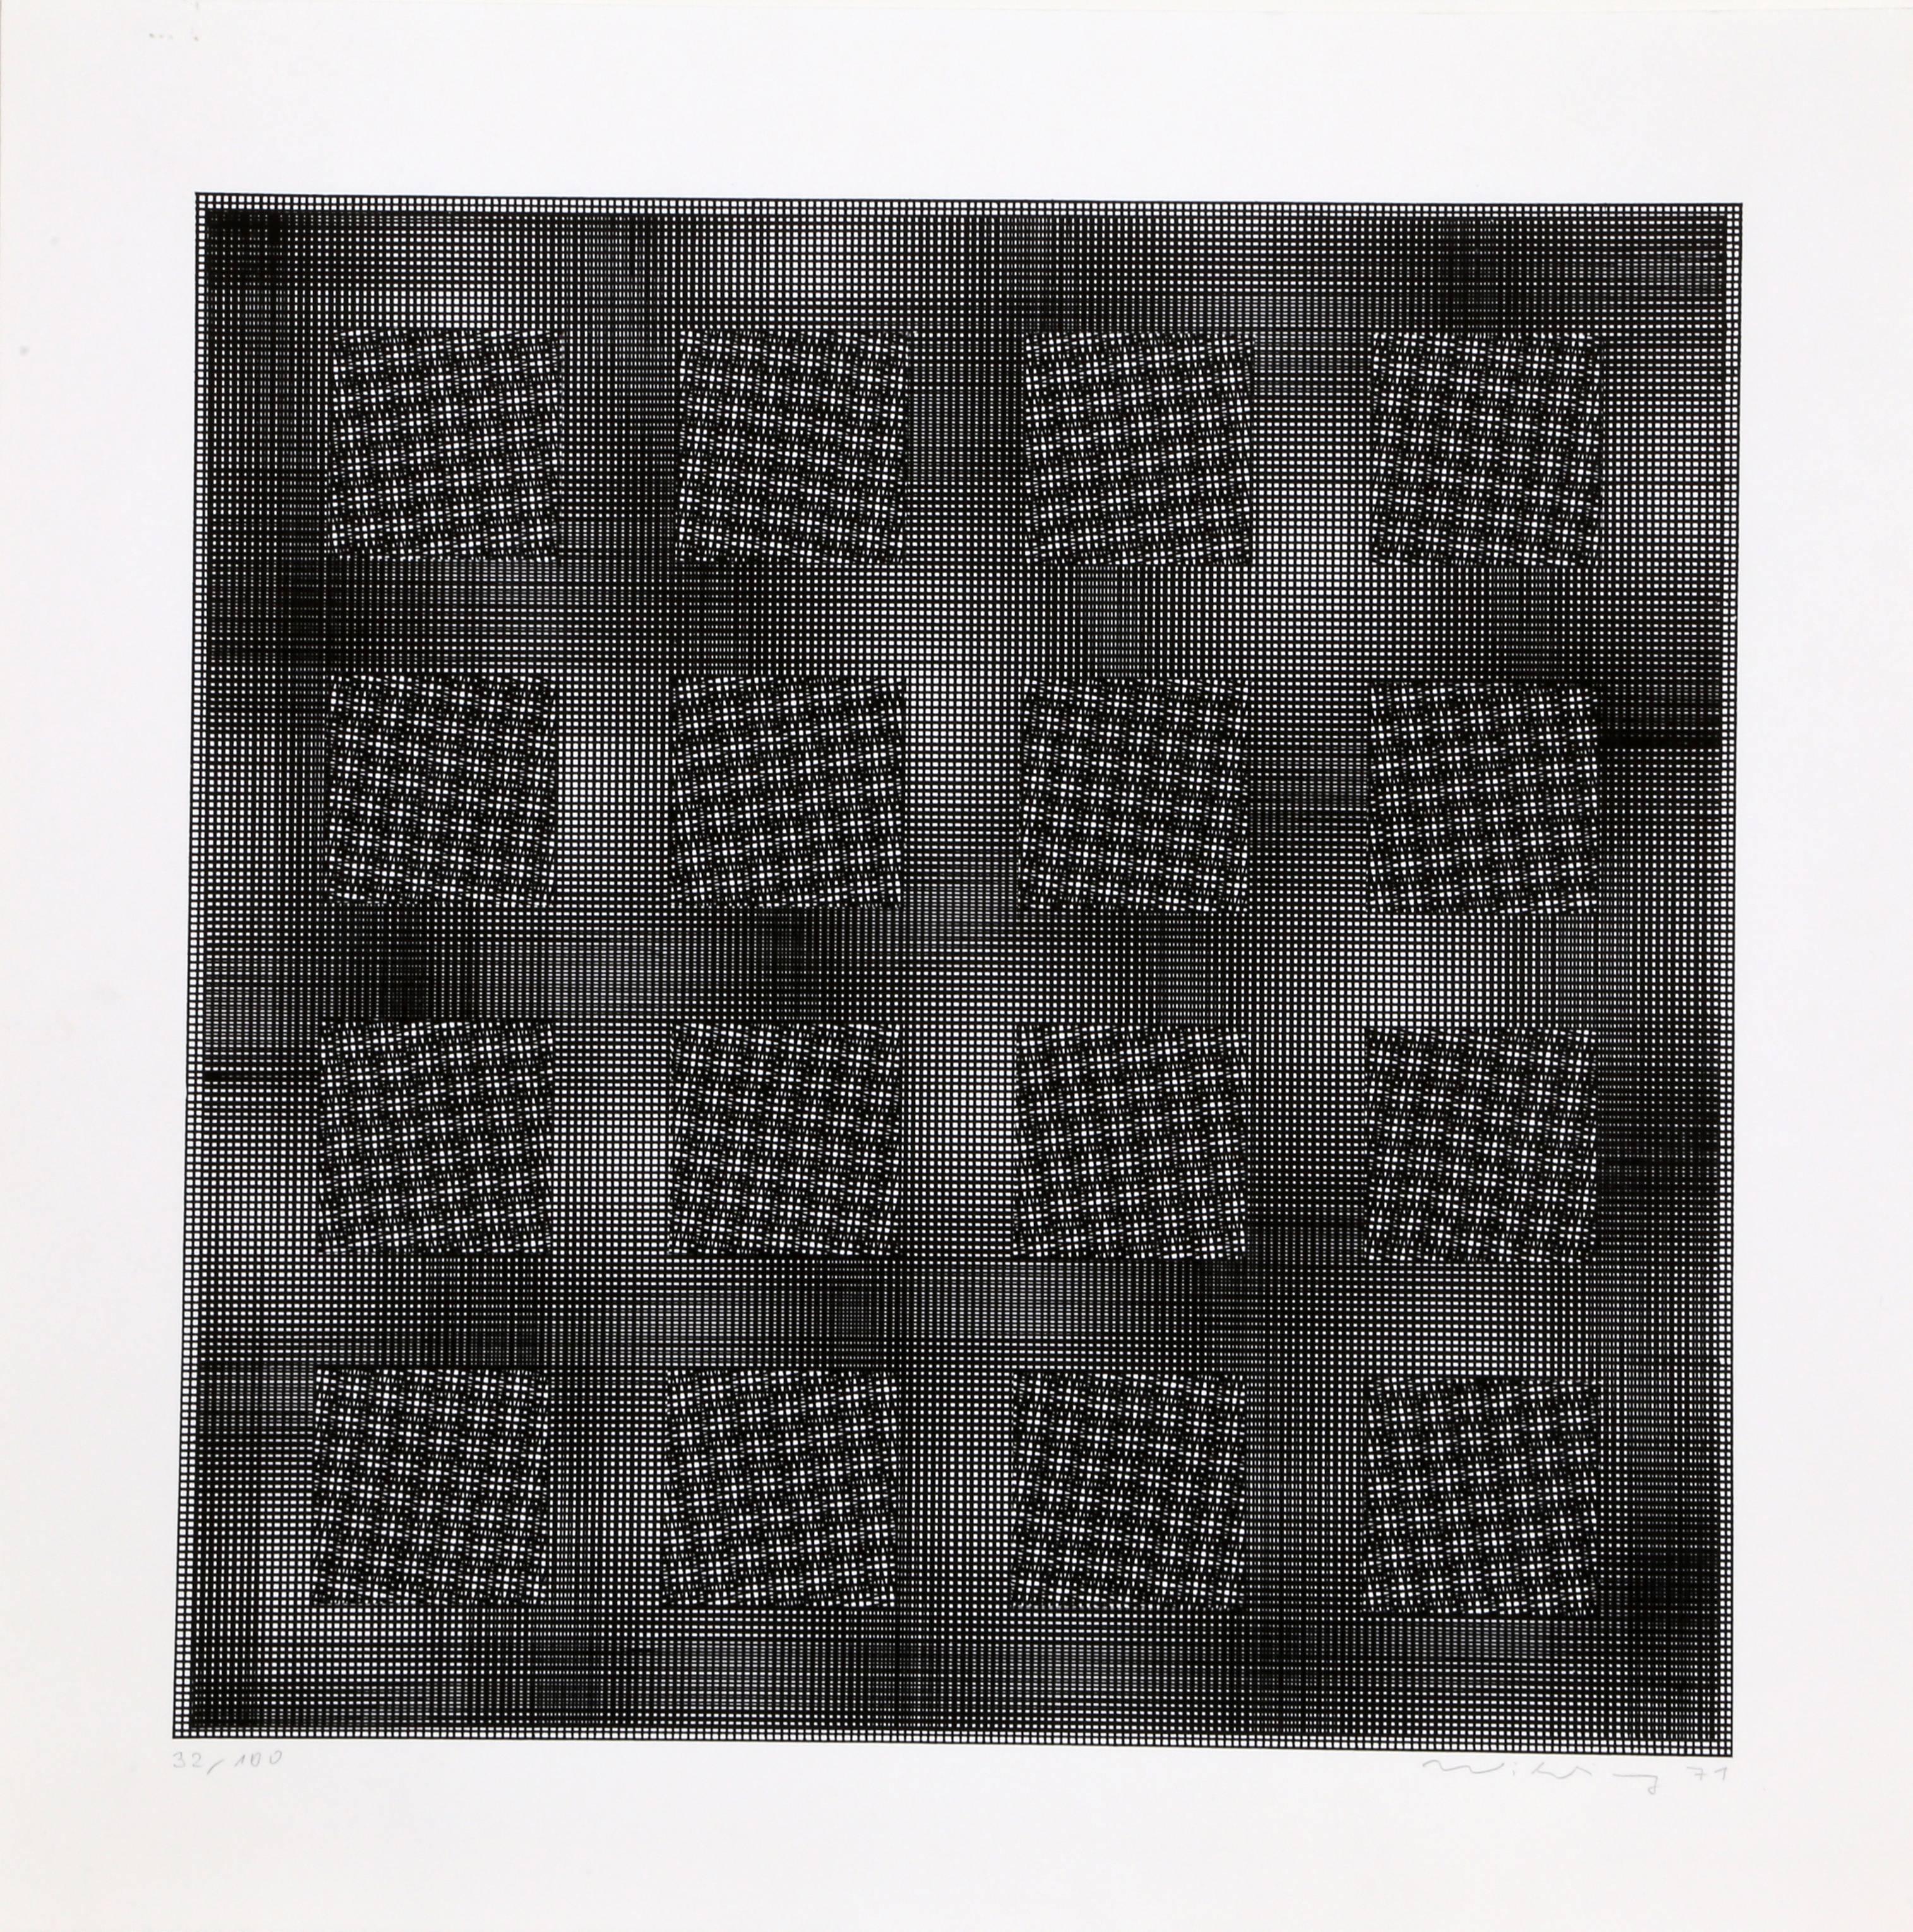 Artist: Ludwig Wilding, German (1927 - 2010)
Title: Squares
Year: 1967
Medium: Screenprint, signed and numbered in pencil
Edition: 38/100
Image Size: 15.5 x 15.5 inches
Size: 23.5 x 23.5 in. (59.69 x 59.69 cm)